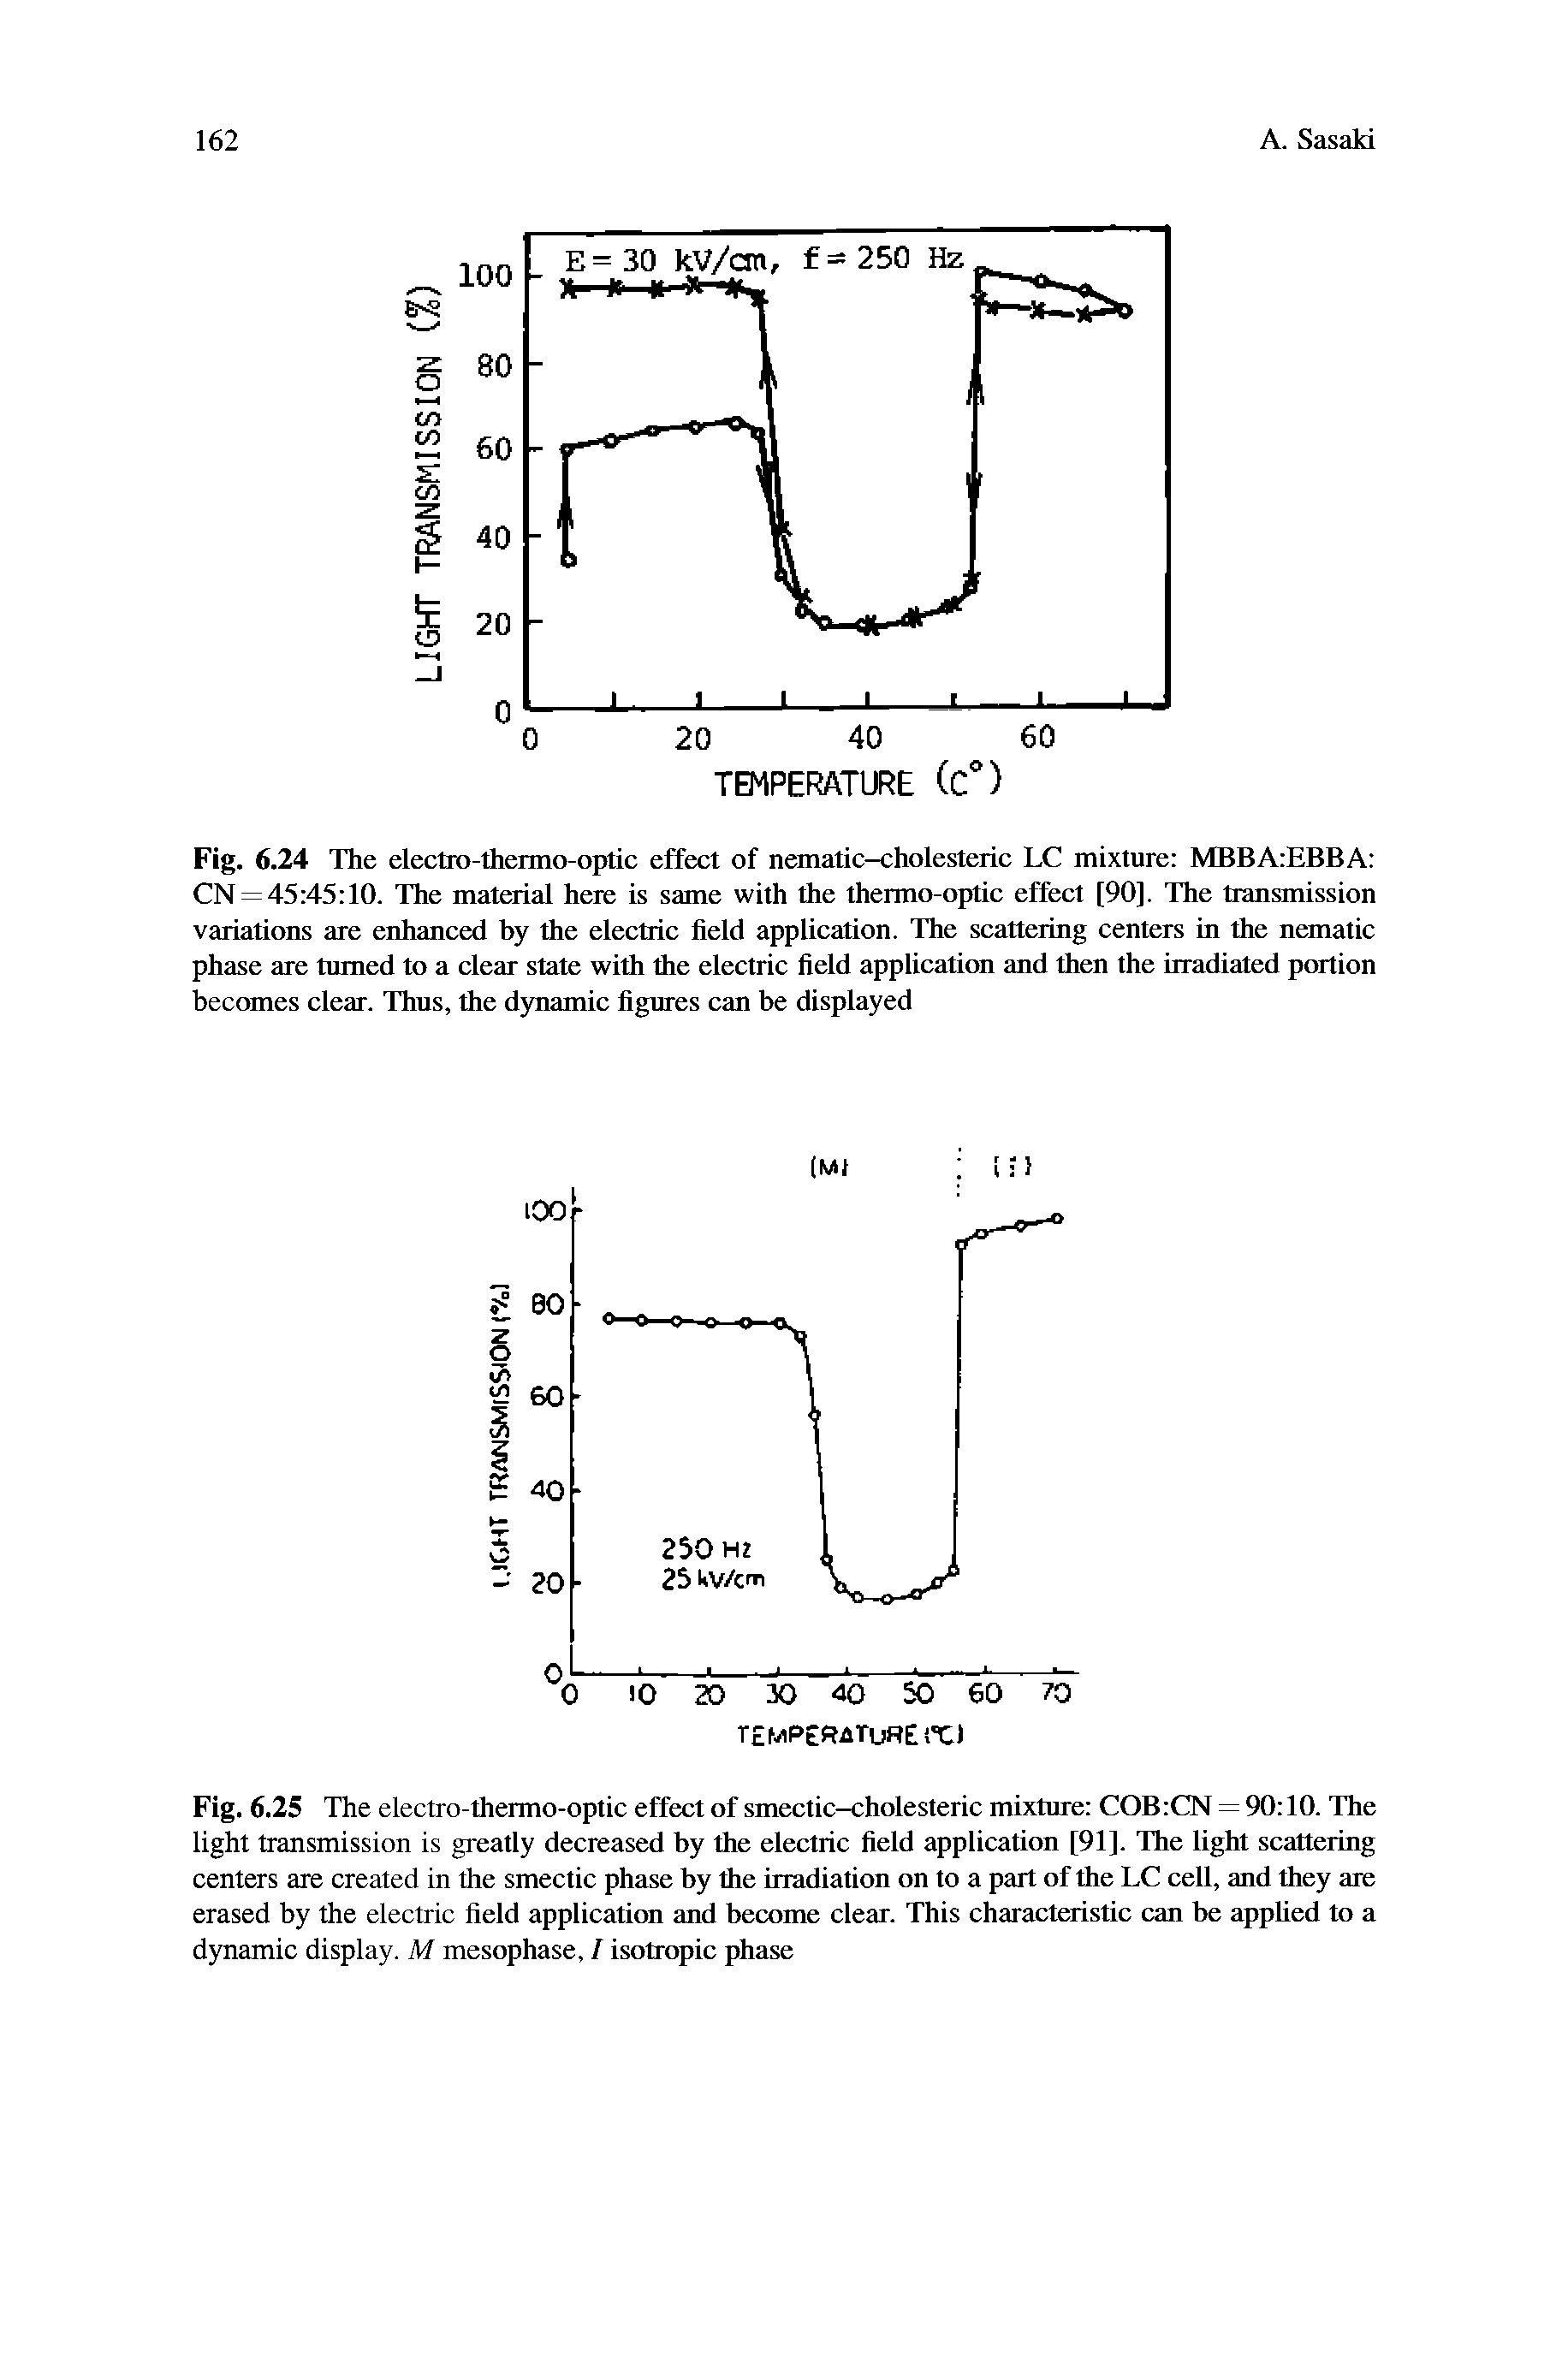 Fig. 6.24 The electro-thenno-optic effect of nematic-cholesteric LC mixture MBBAiEBBA CN = 45 45 10. The material here is same with the thermo-optic effect [90]. The transmission variations are enhanced by the electric field application. The scattering centers in the nematic phase are turned to a clear state with the electric field application and then the irradiated portion becomes clear. Thus, the dynamic figures can be displayed...